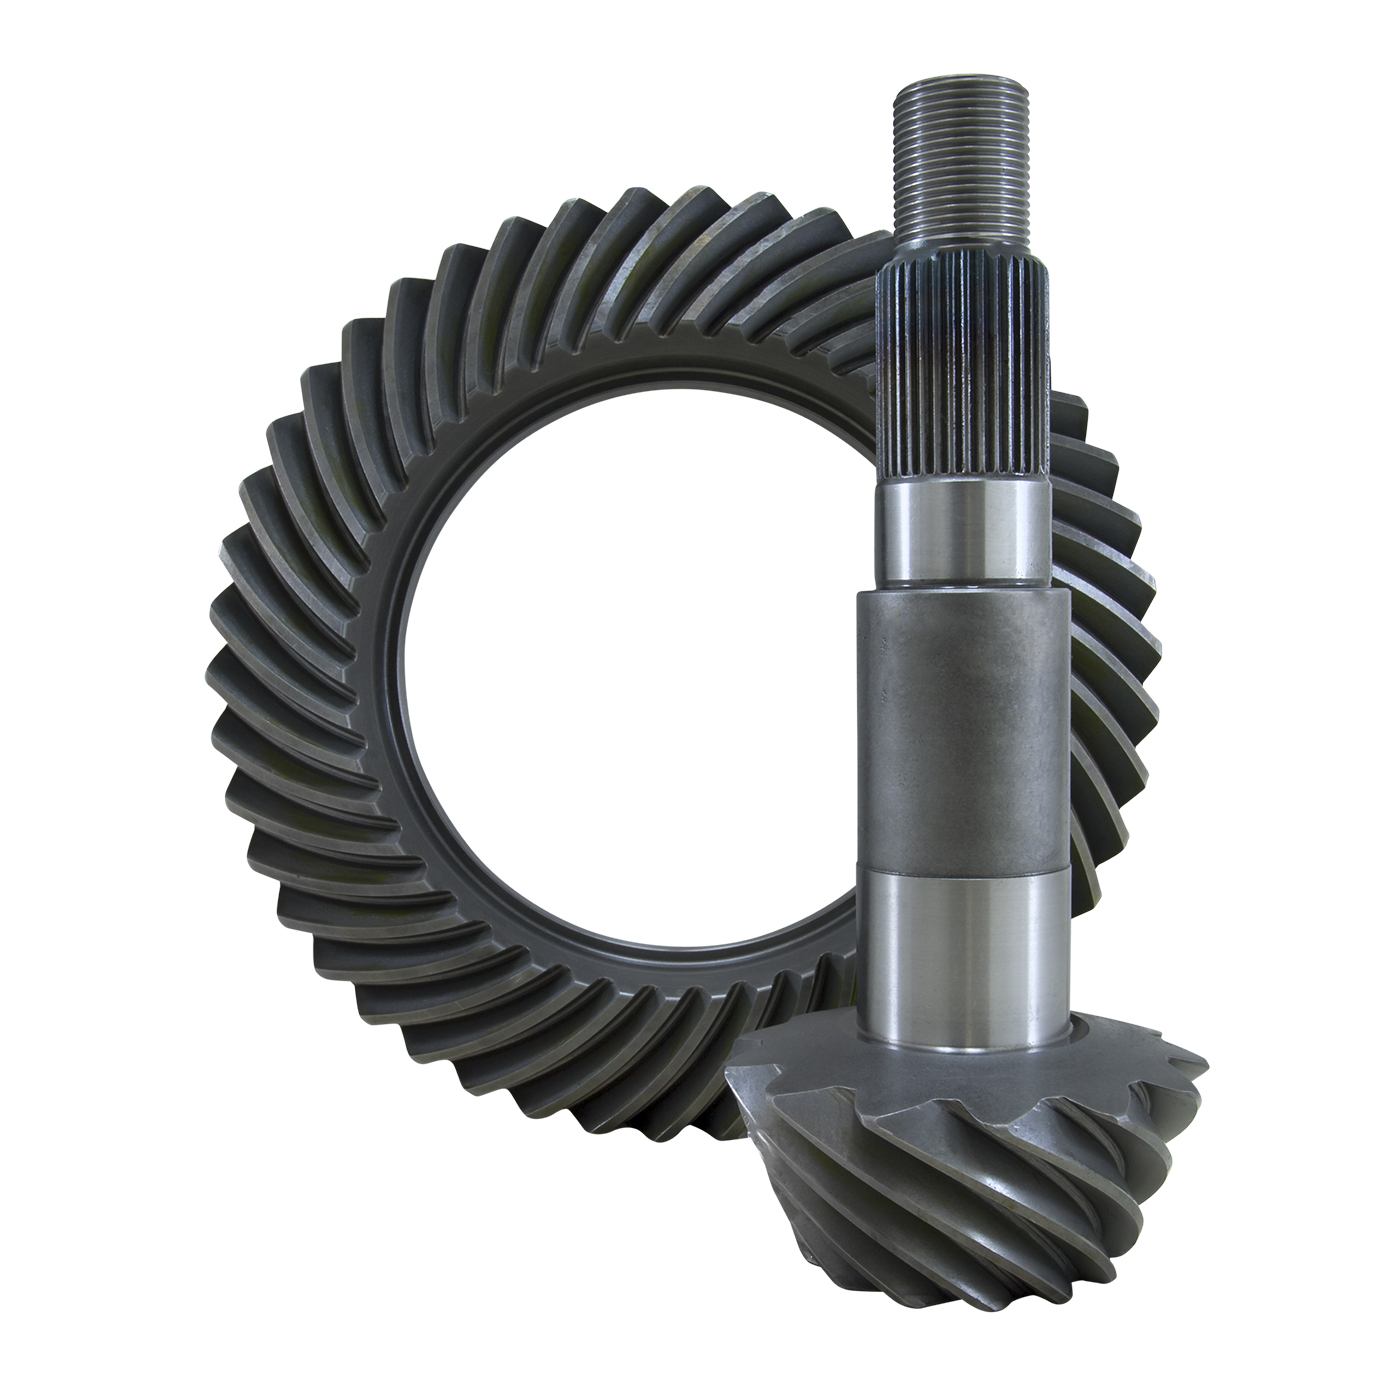 USA Standard replacement Ring & Pinion gear set for Dana 80 in a 4.88 ratio